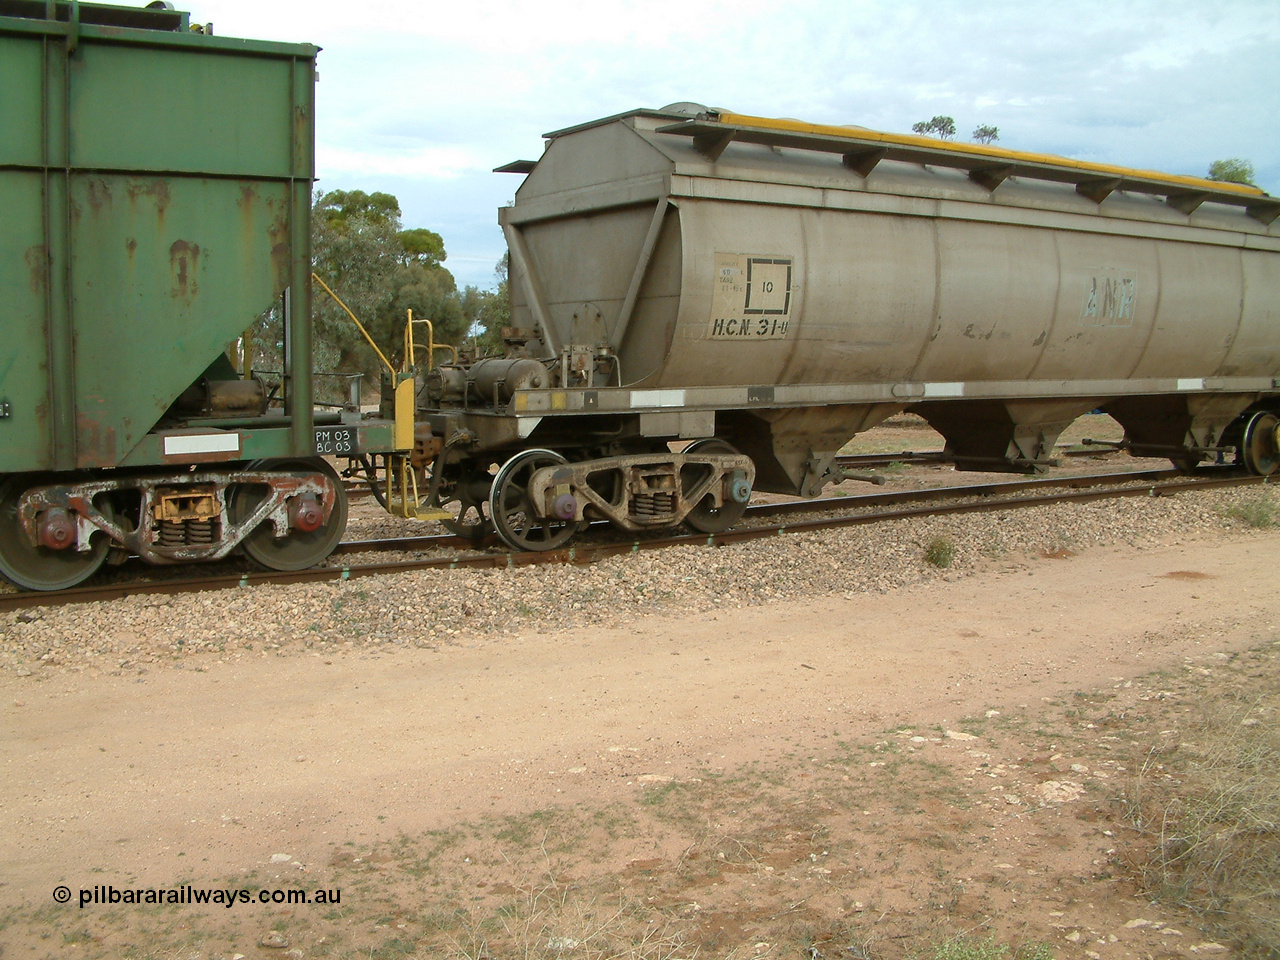 030407 082440
Wudinna, detail view of HCN type bogie wheat waggon HCN 31, modified at Islington Workshops in 1978-80 which started life as a Tulloch built NHB type iron ore hopper for the CR on the North Australia Railway in 1968-69, showing a spoke wheel and disc wheel sets in the bogie. 7th April 2003.
Keywords: HCN-type;HCN31;Tulloch-Ltd-NSW;NHB-type;